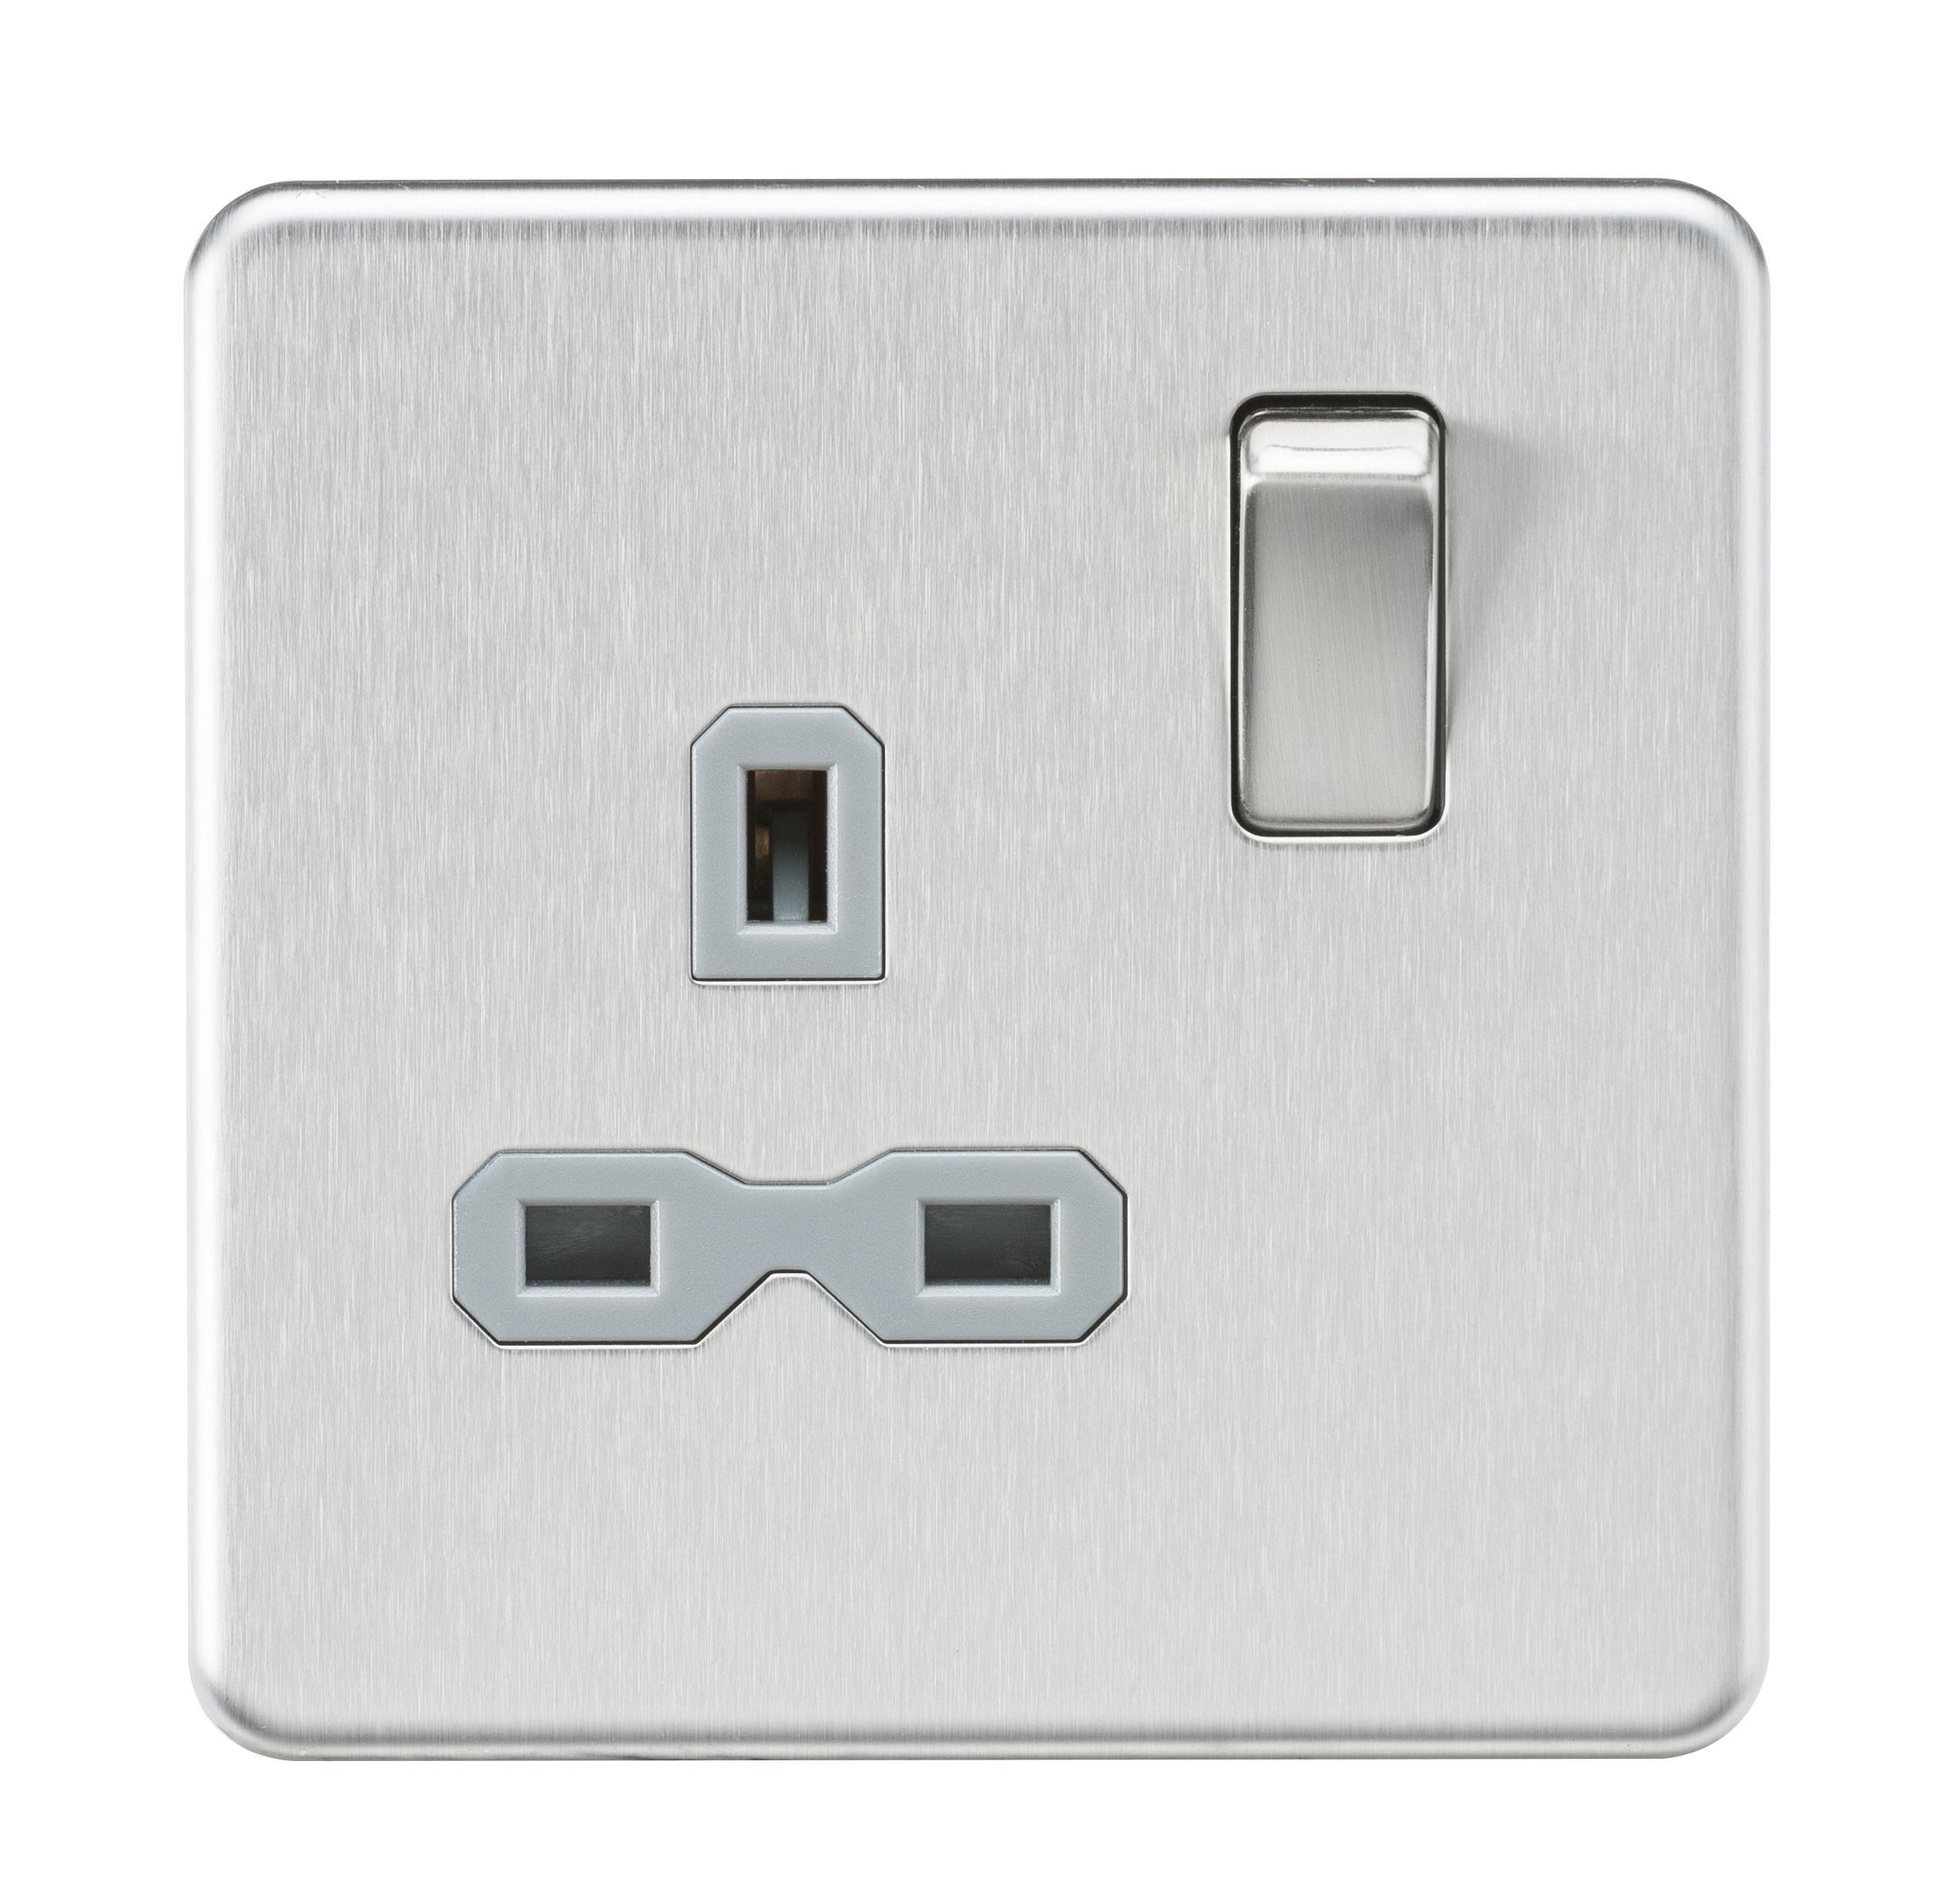 Screwless 13A 1G DP Switched Socket - Brushed Chrome With Grey Insert - SFR7000BCG 